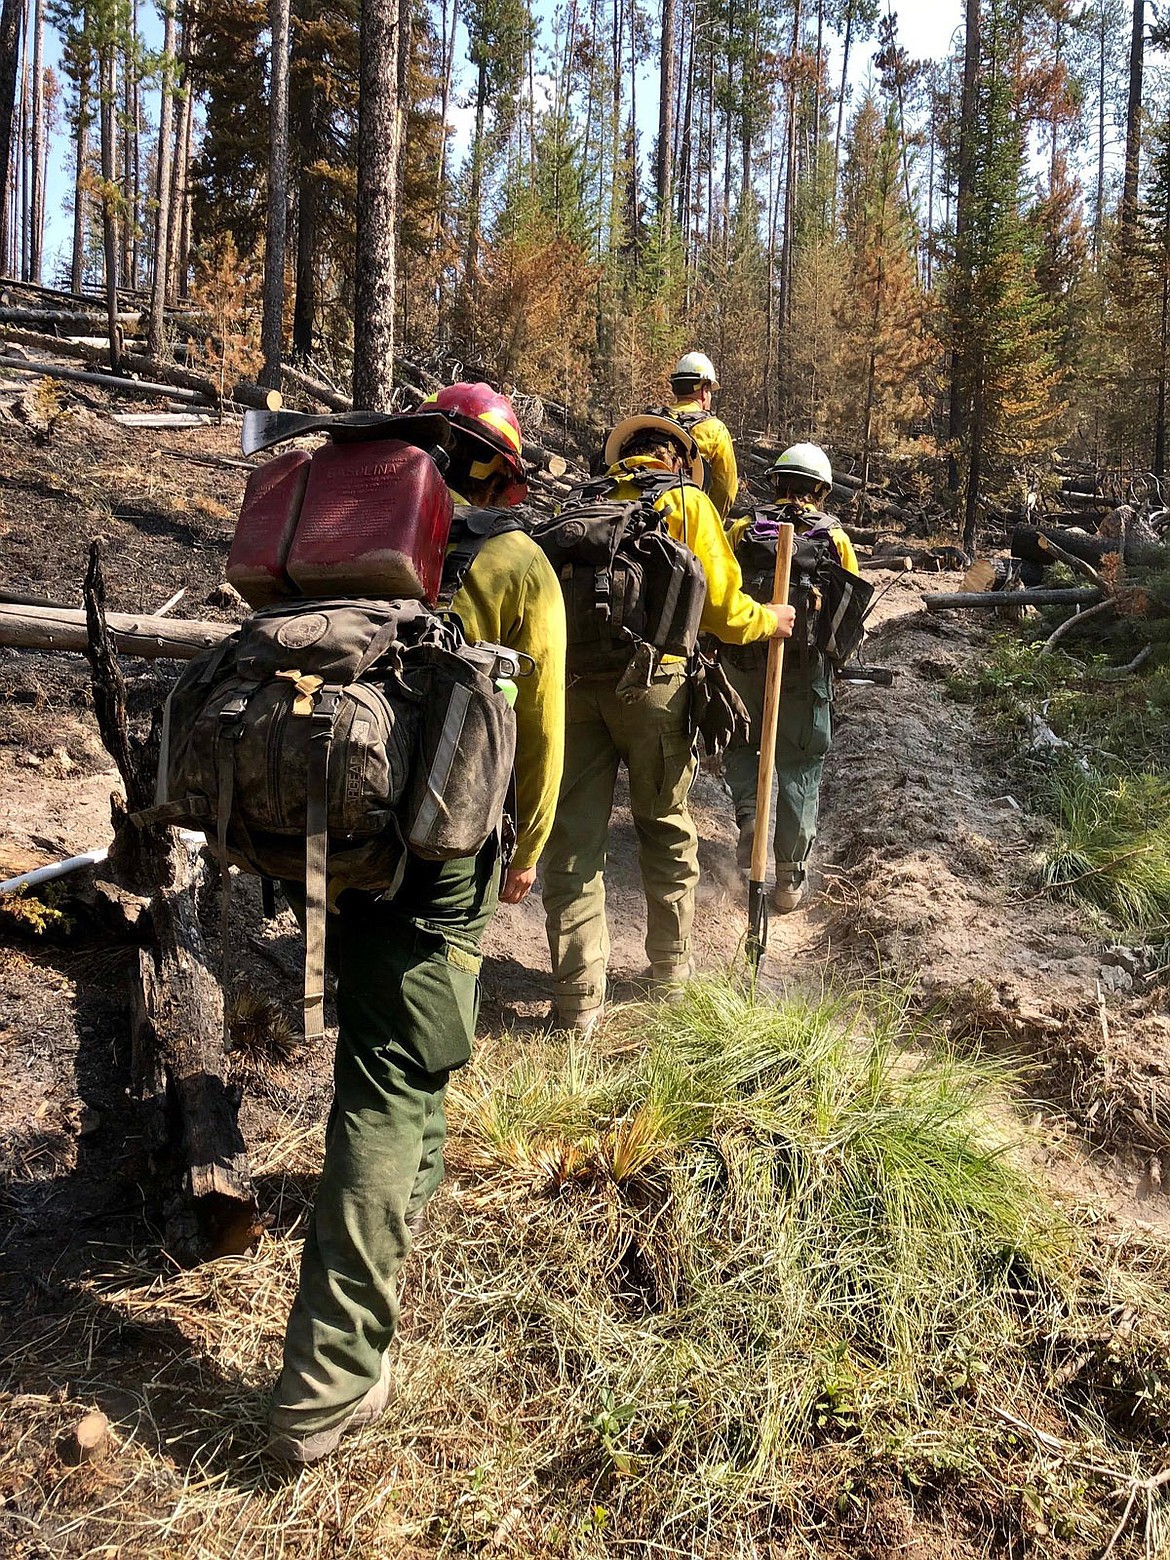 A U.S. Forest Service crew from Eureka hikes to the fireline of the Porcupine fire earlier this week. (Courtesy U.S. Forest Service/Kootenai National Forest)